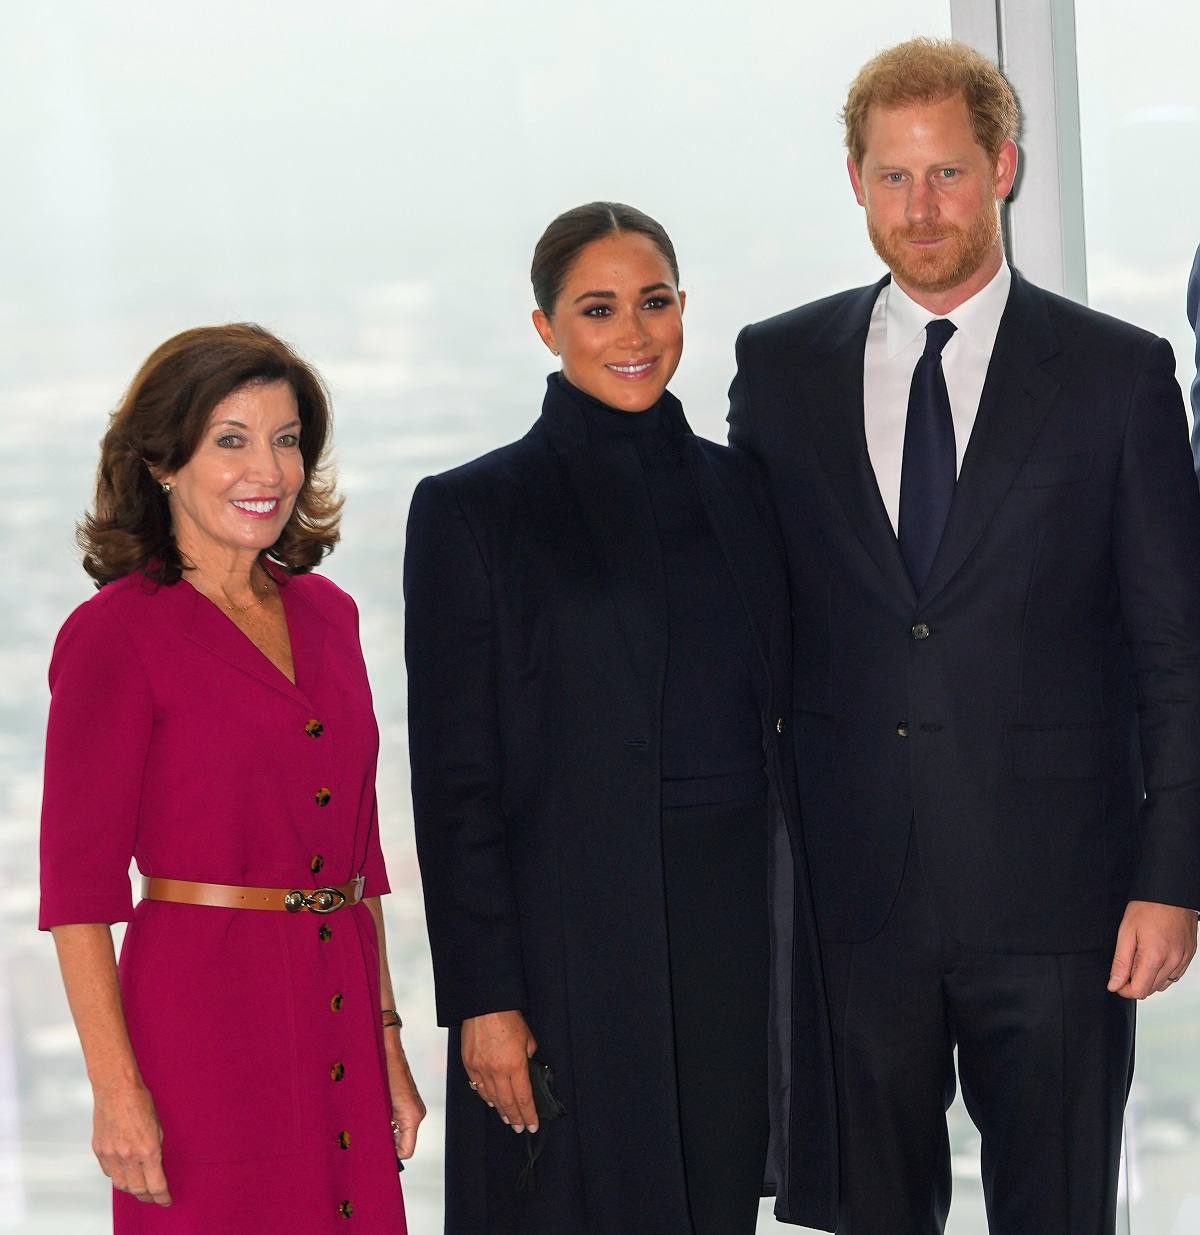 New York Gov. Kathy Hochul with Prince Harry and Meghan Markle at 1 World Trade Center on Sept. 23, 2021